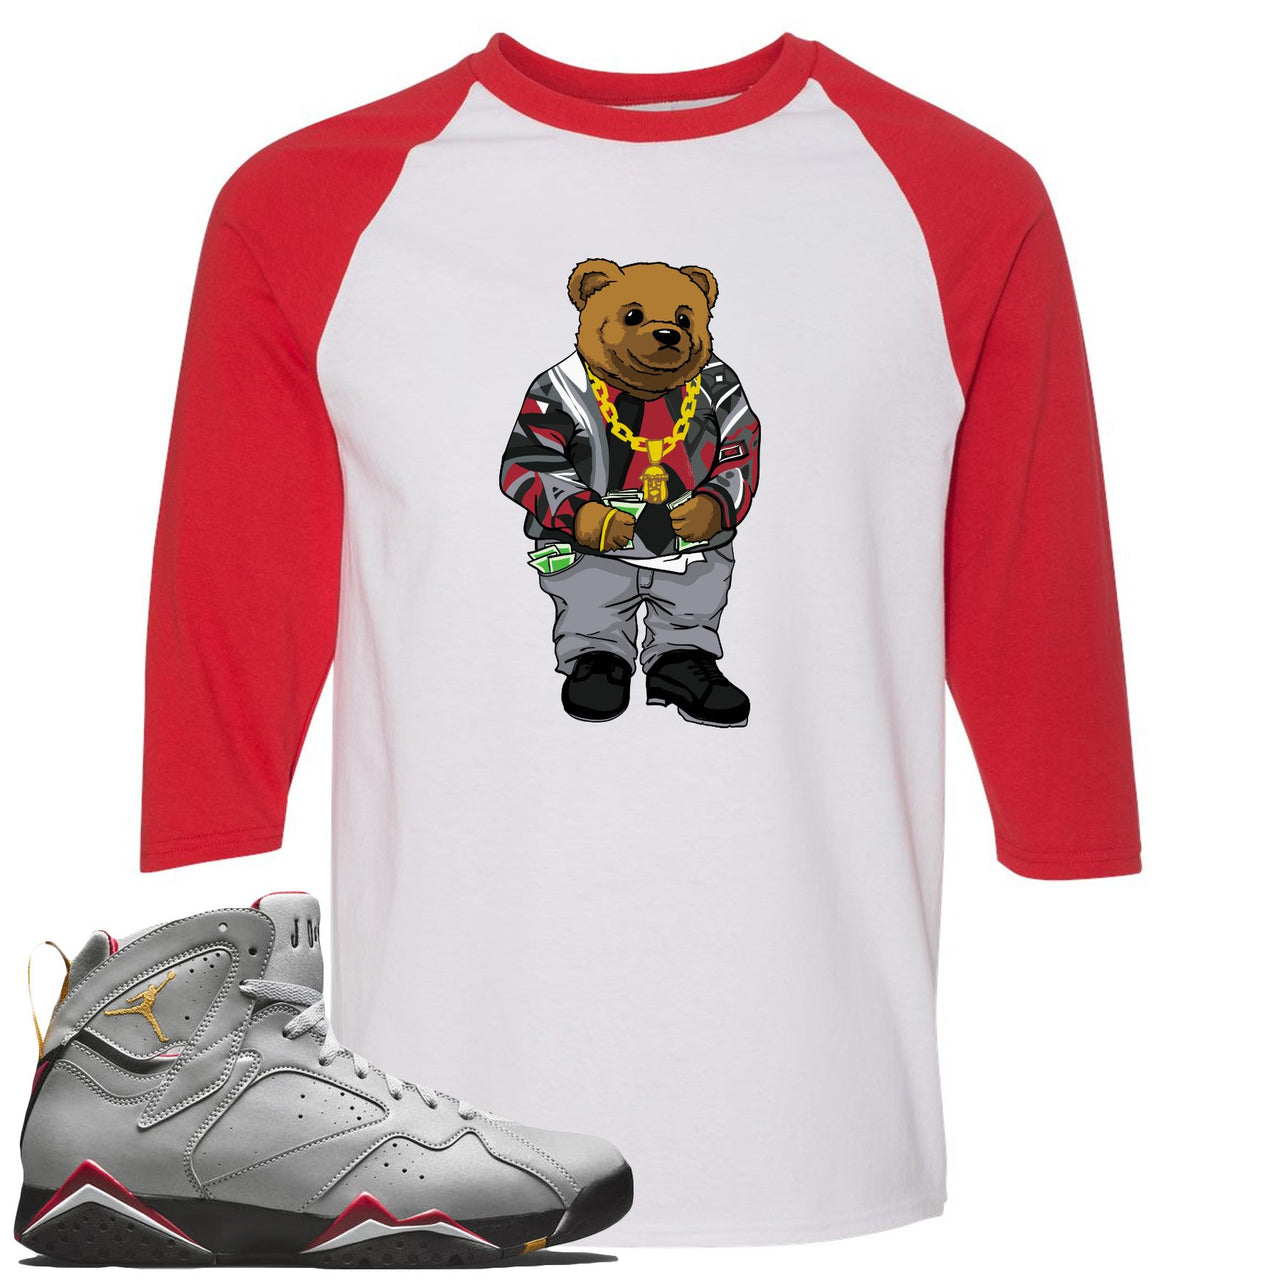 Reflections of a Champion 7s Raglan T Shirt | Sweater Bear, White and Red